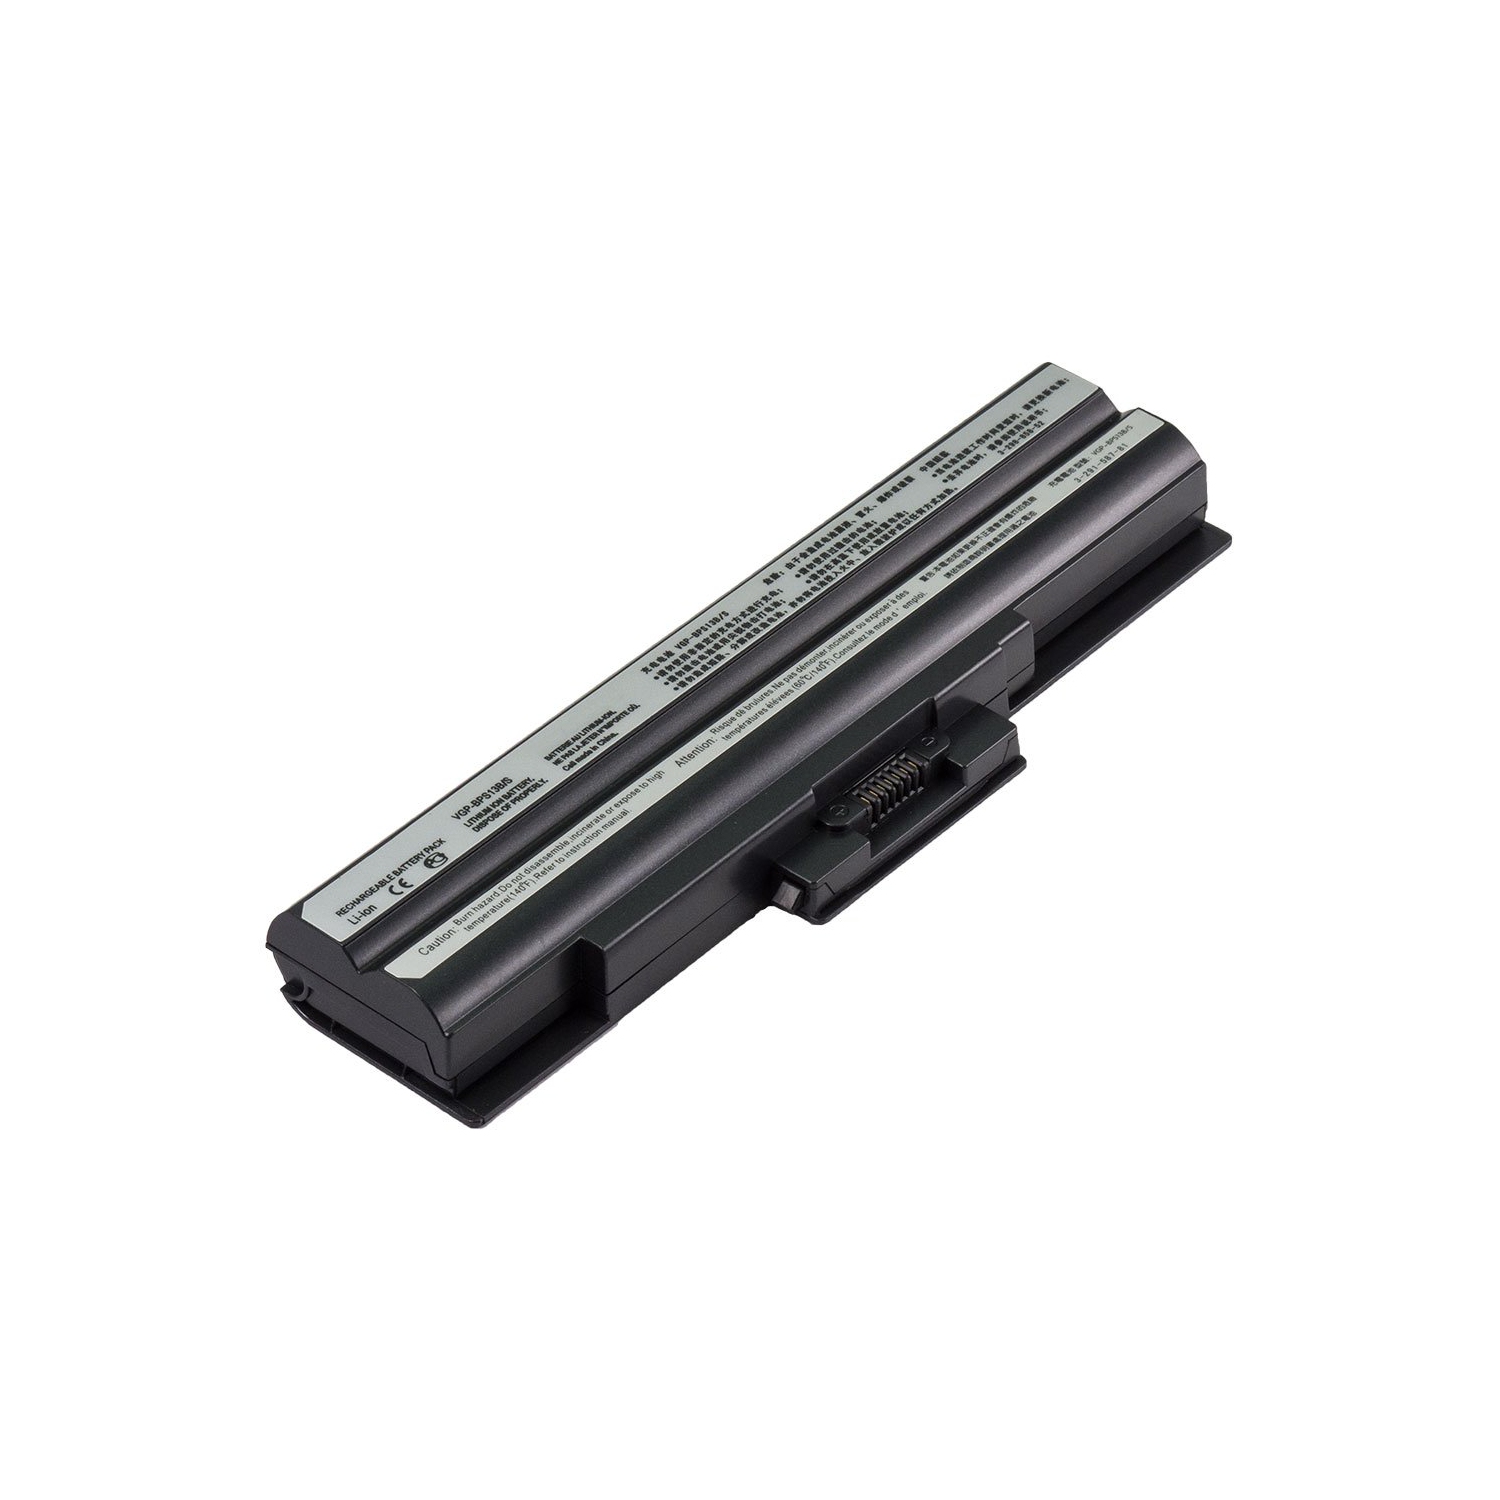 Laptop Battery Replacement for Sony VAIO VGN-CS160J/P, VGP-BPL13, VGP-BPS13/Q, VGP-BPS13A/B, VGP-BPS13A/S, VGP-BPS13A